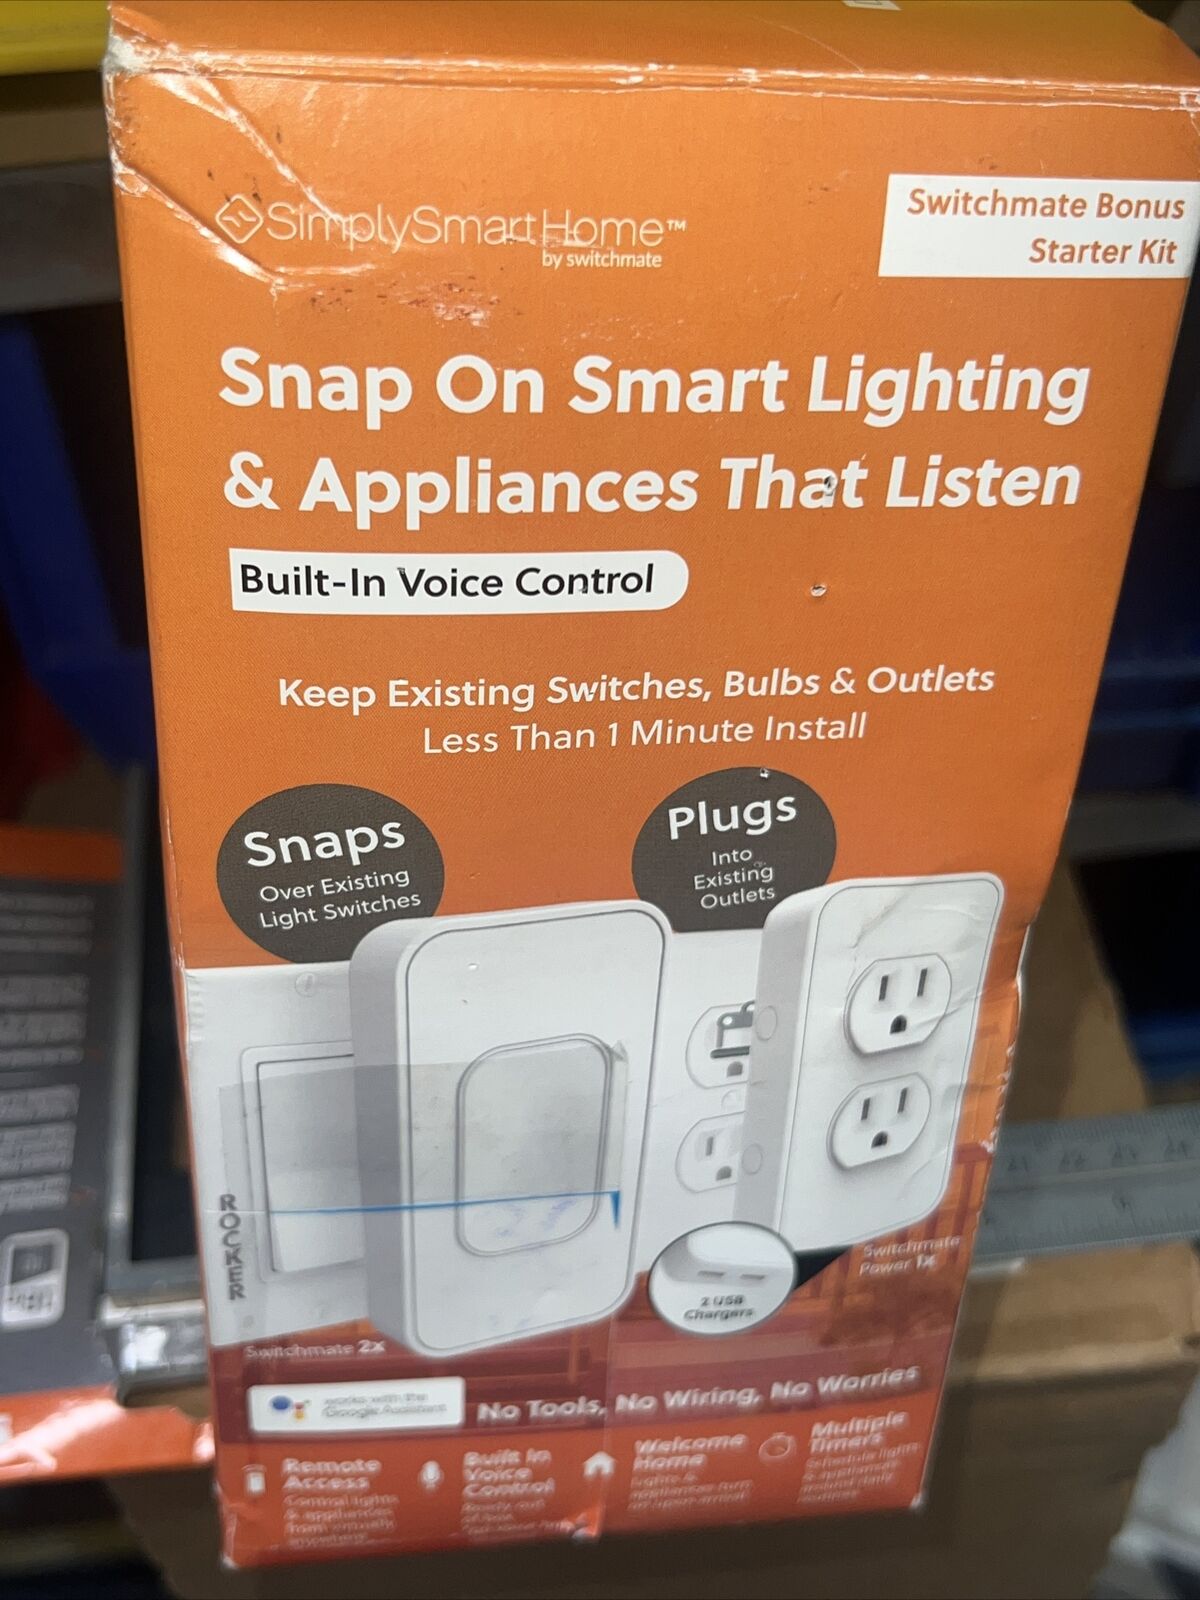 Simply Smart Home Snap on smart lighting & appliances that listen